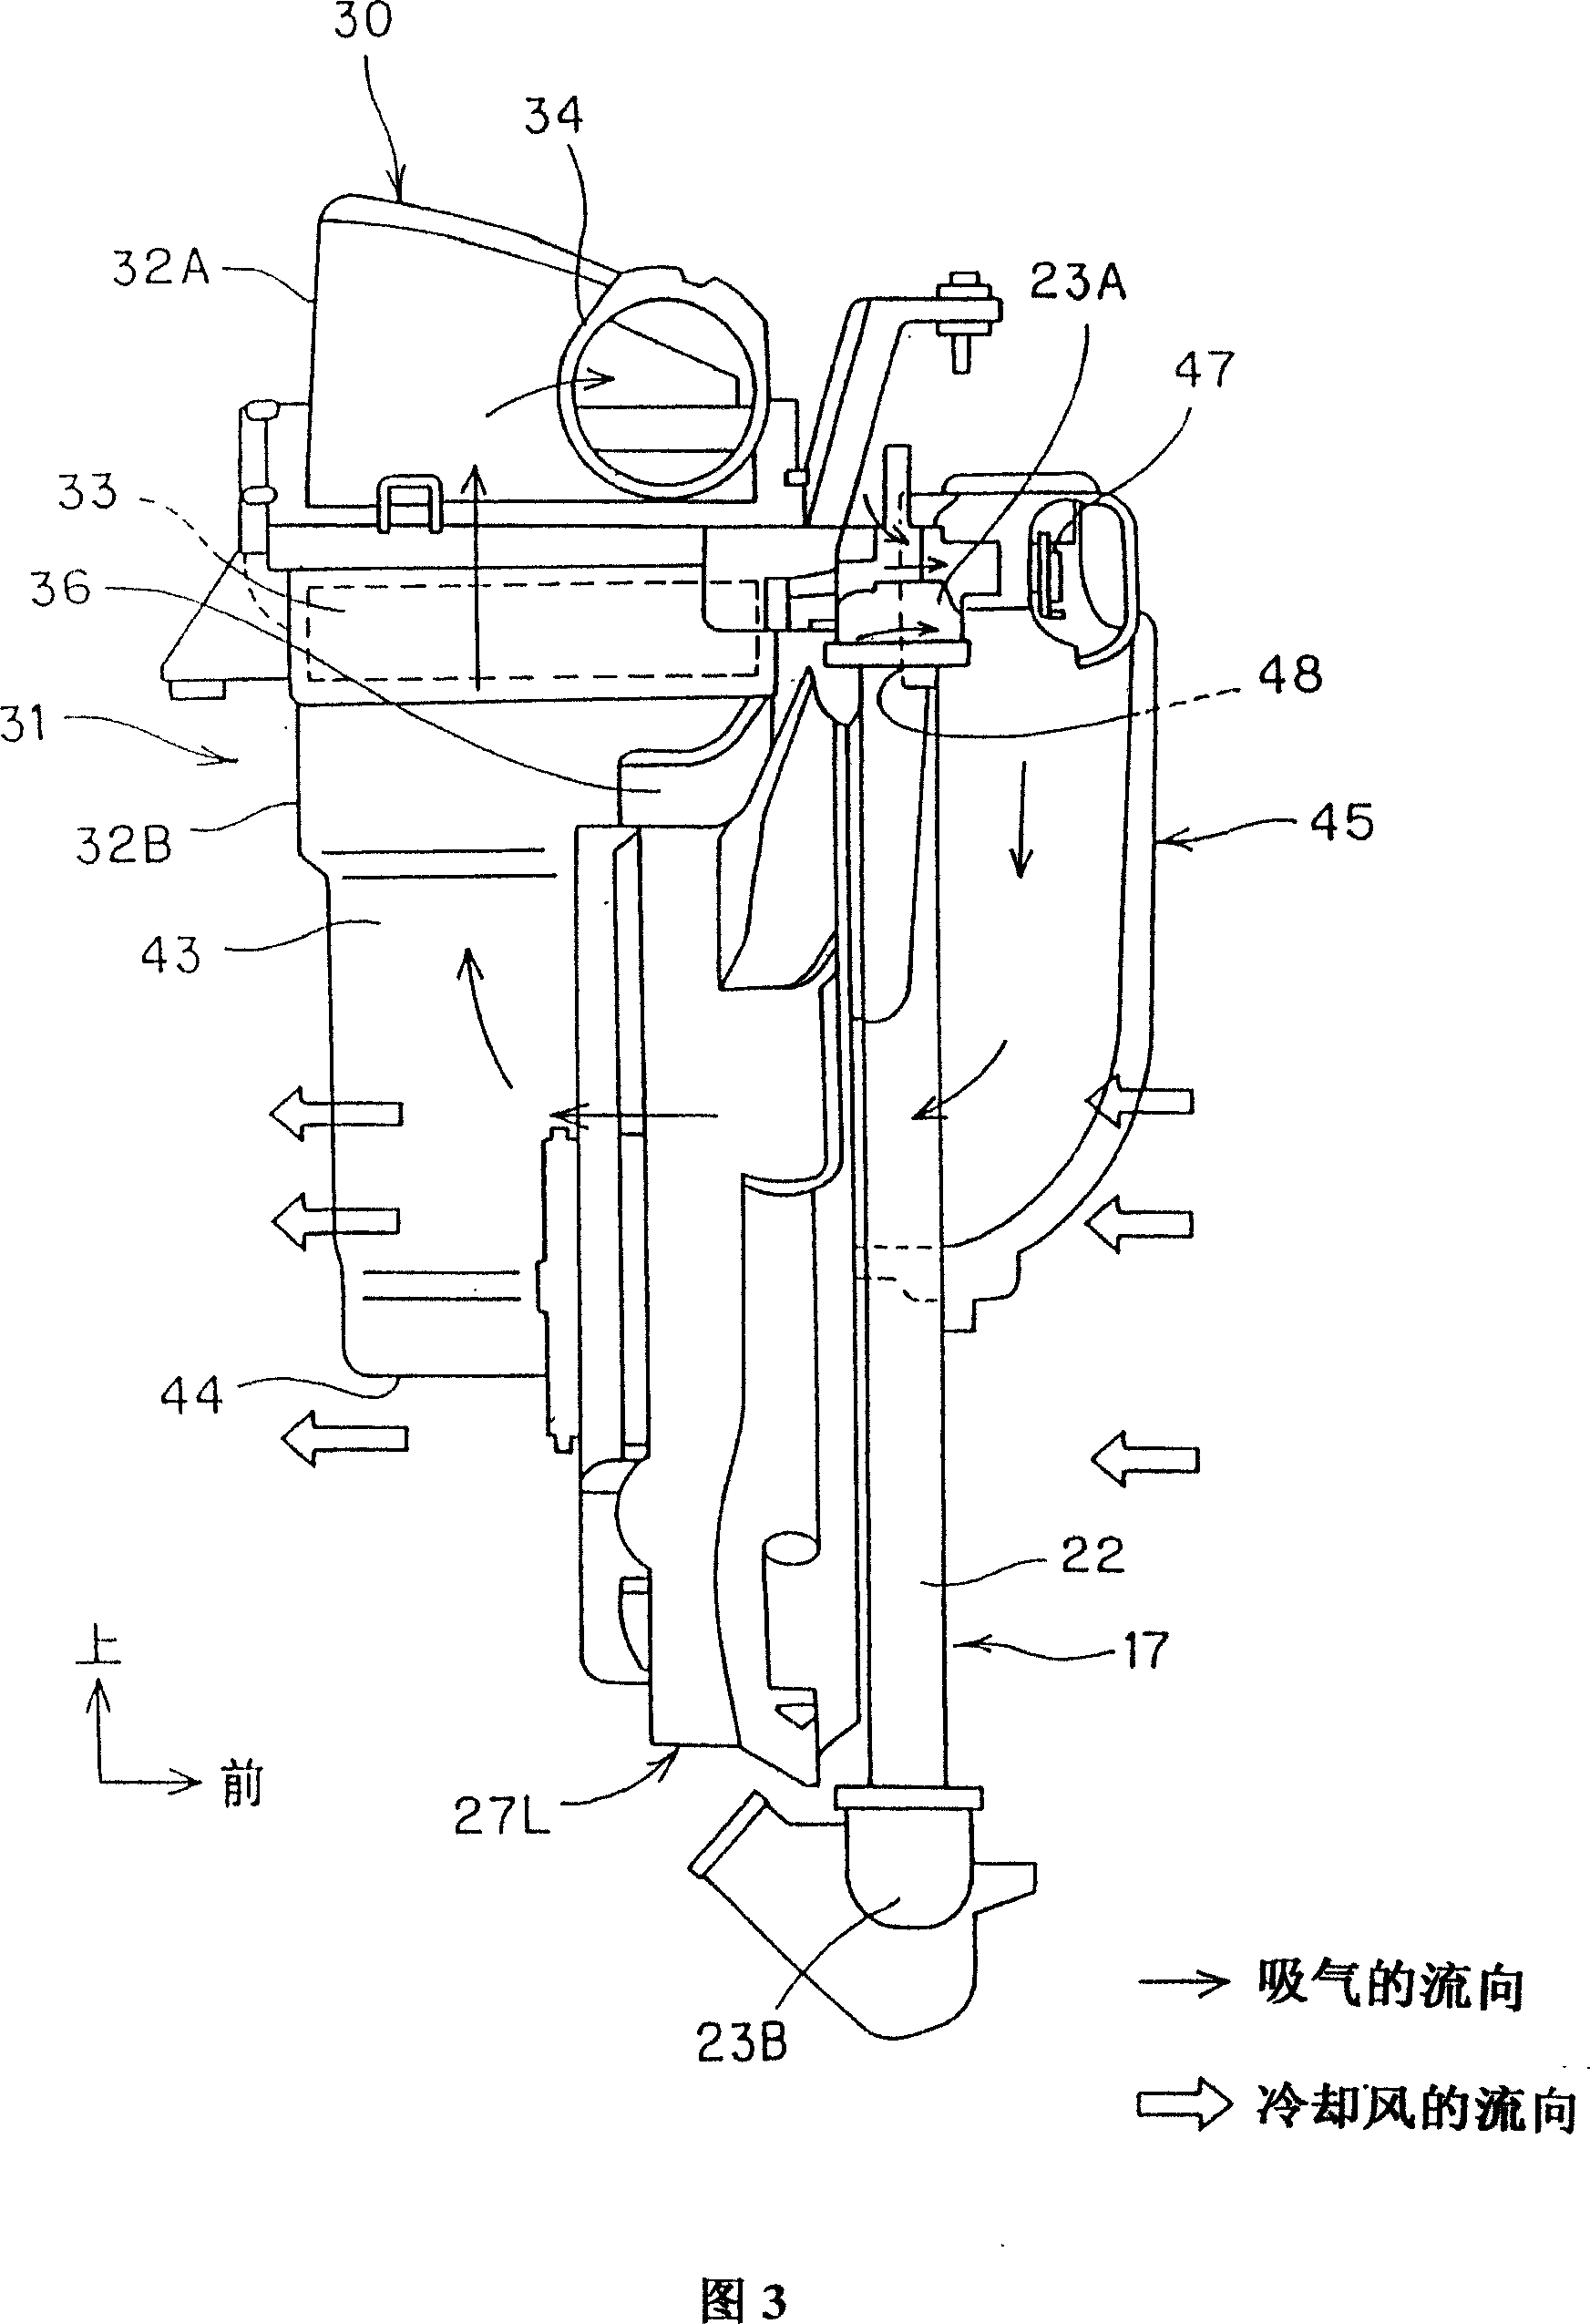 Air inlet unit of motor for vehicle